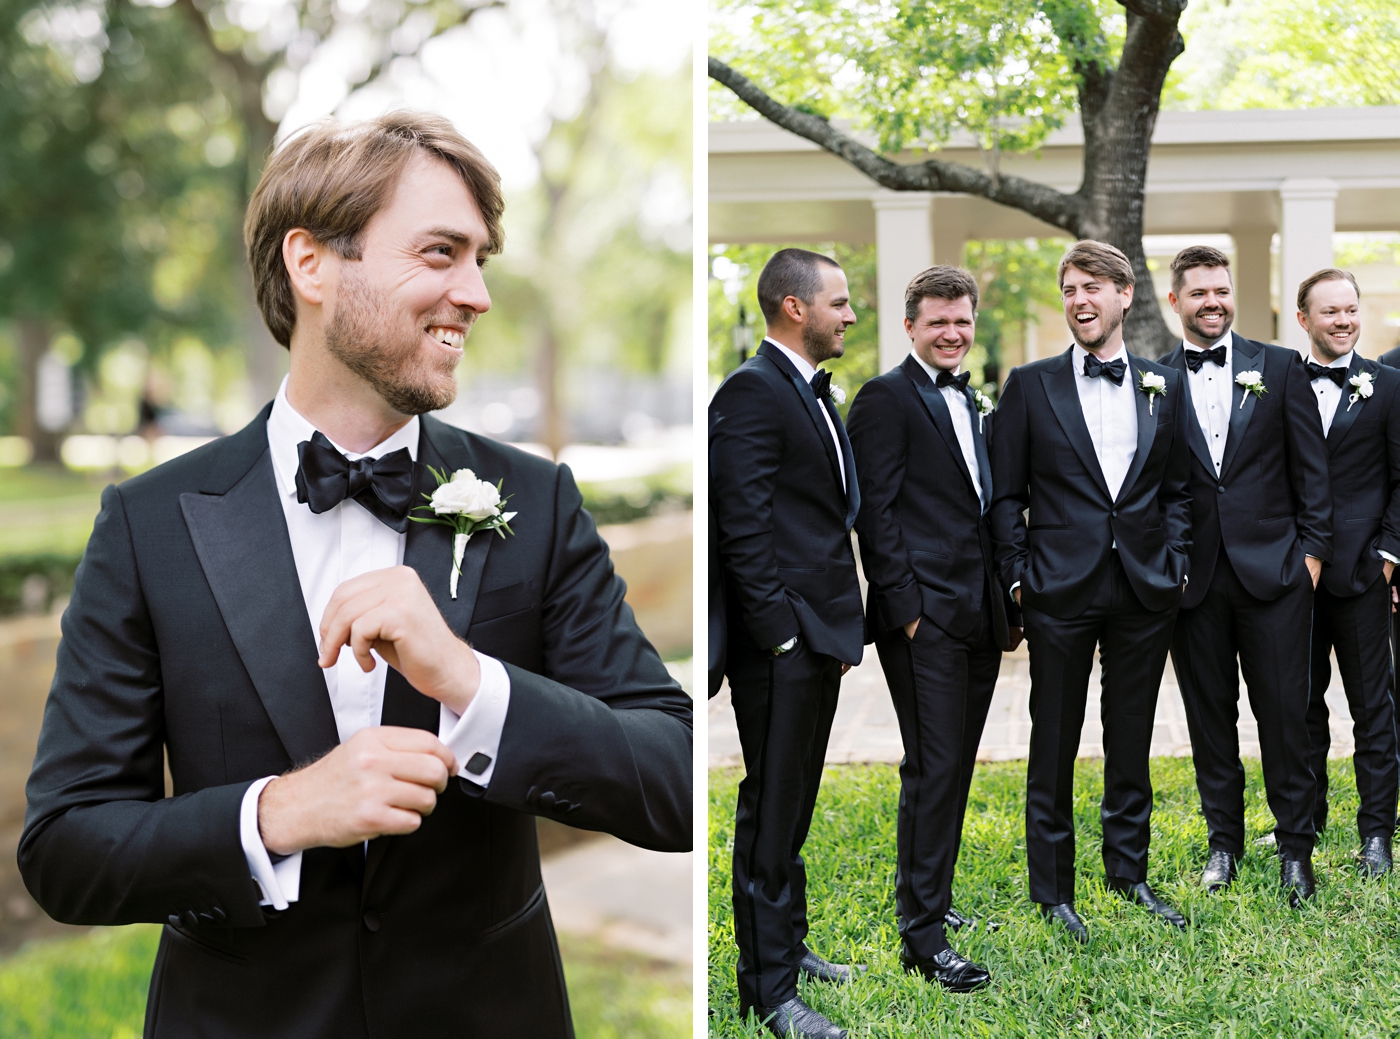 Groom and groomsmen wedding day pictures